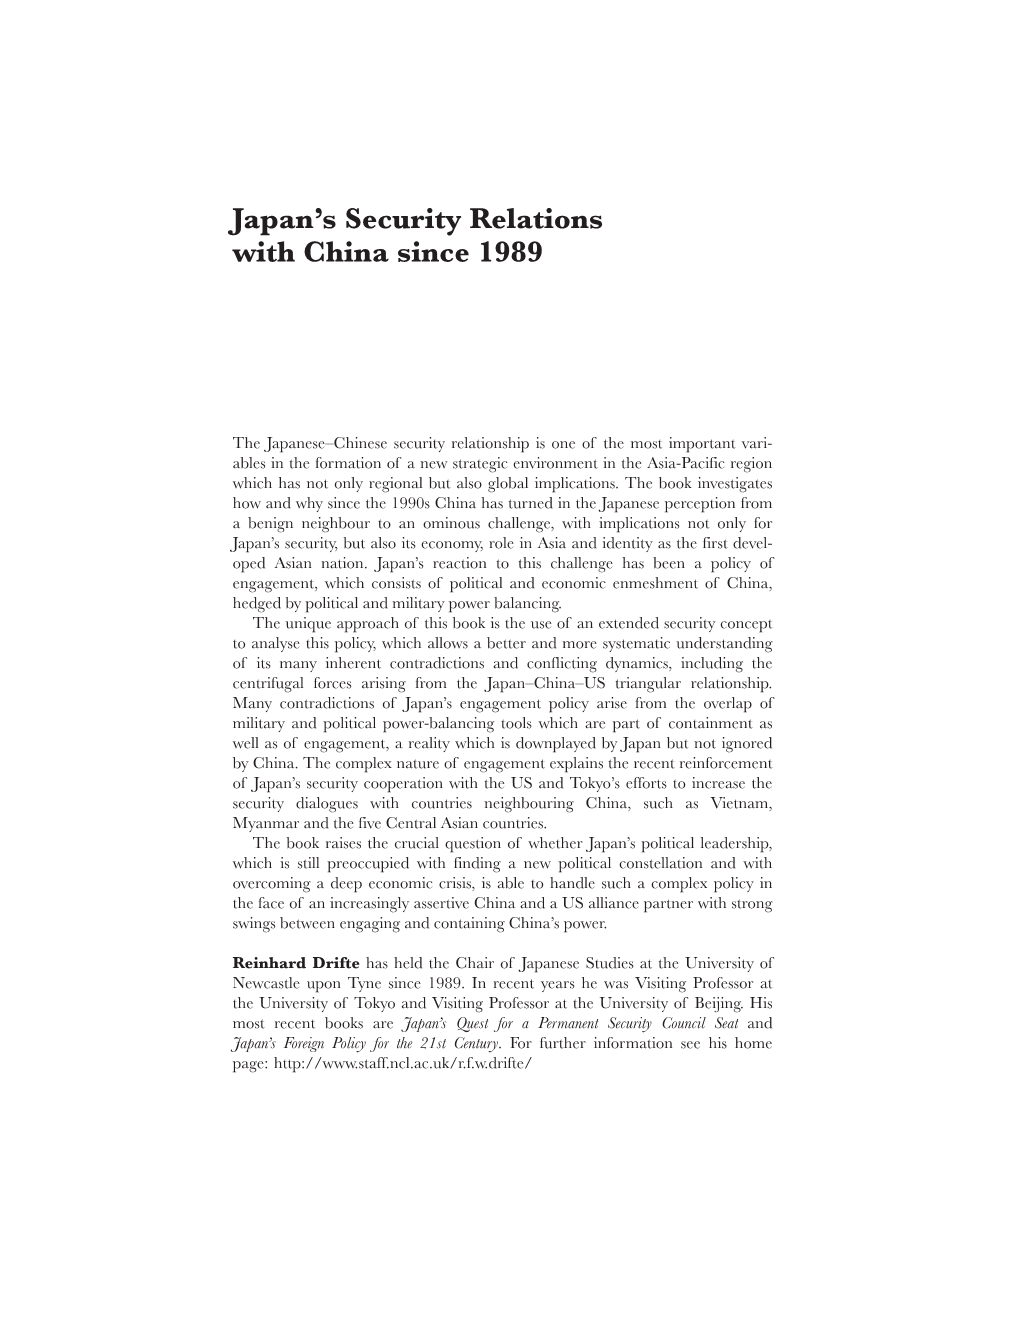 Japan's Security Relations with China Since 1989